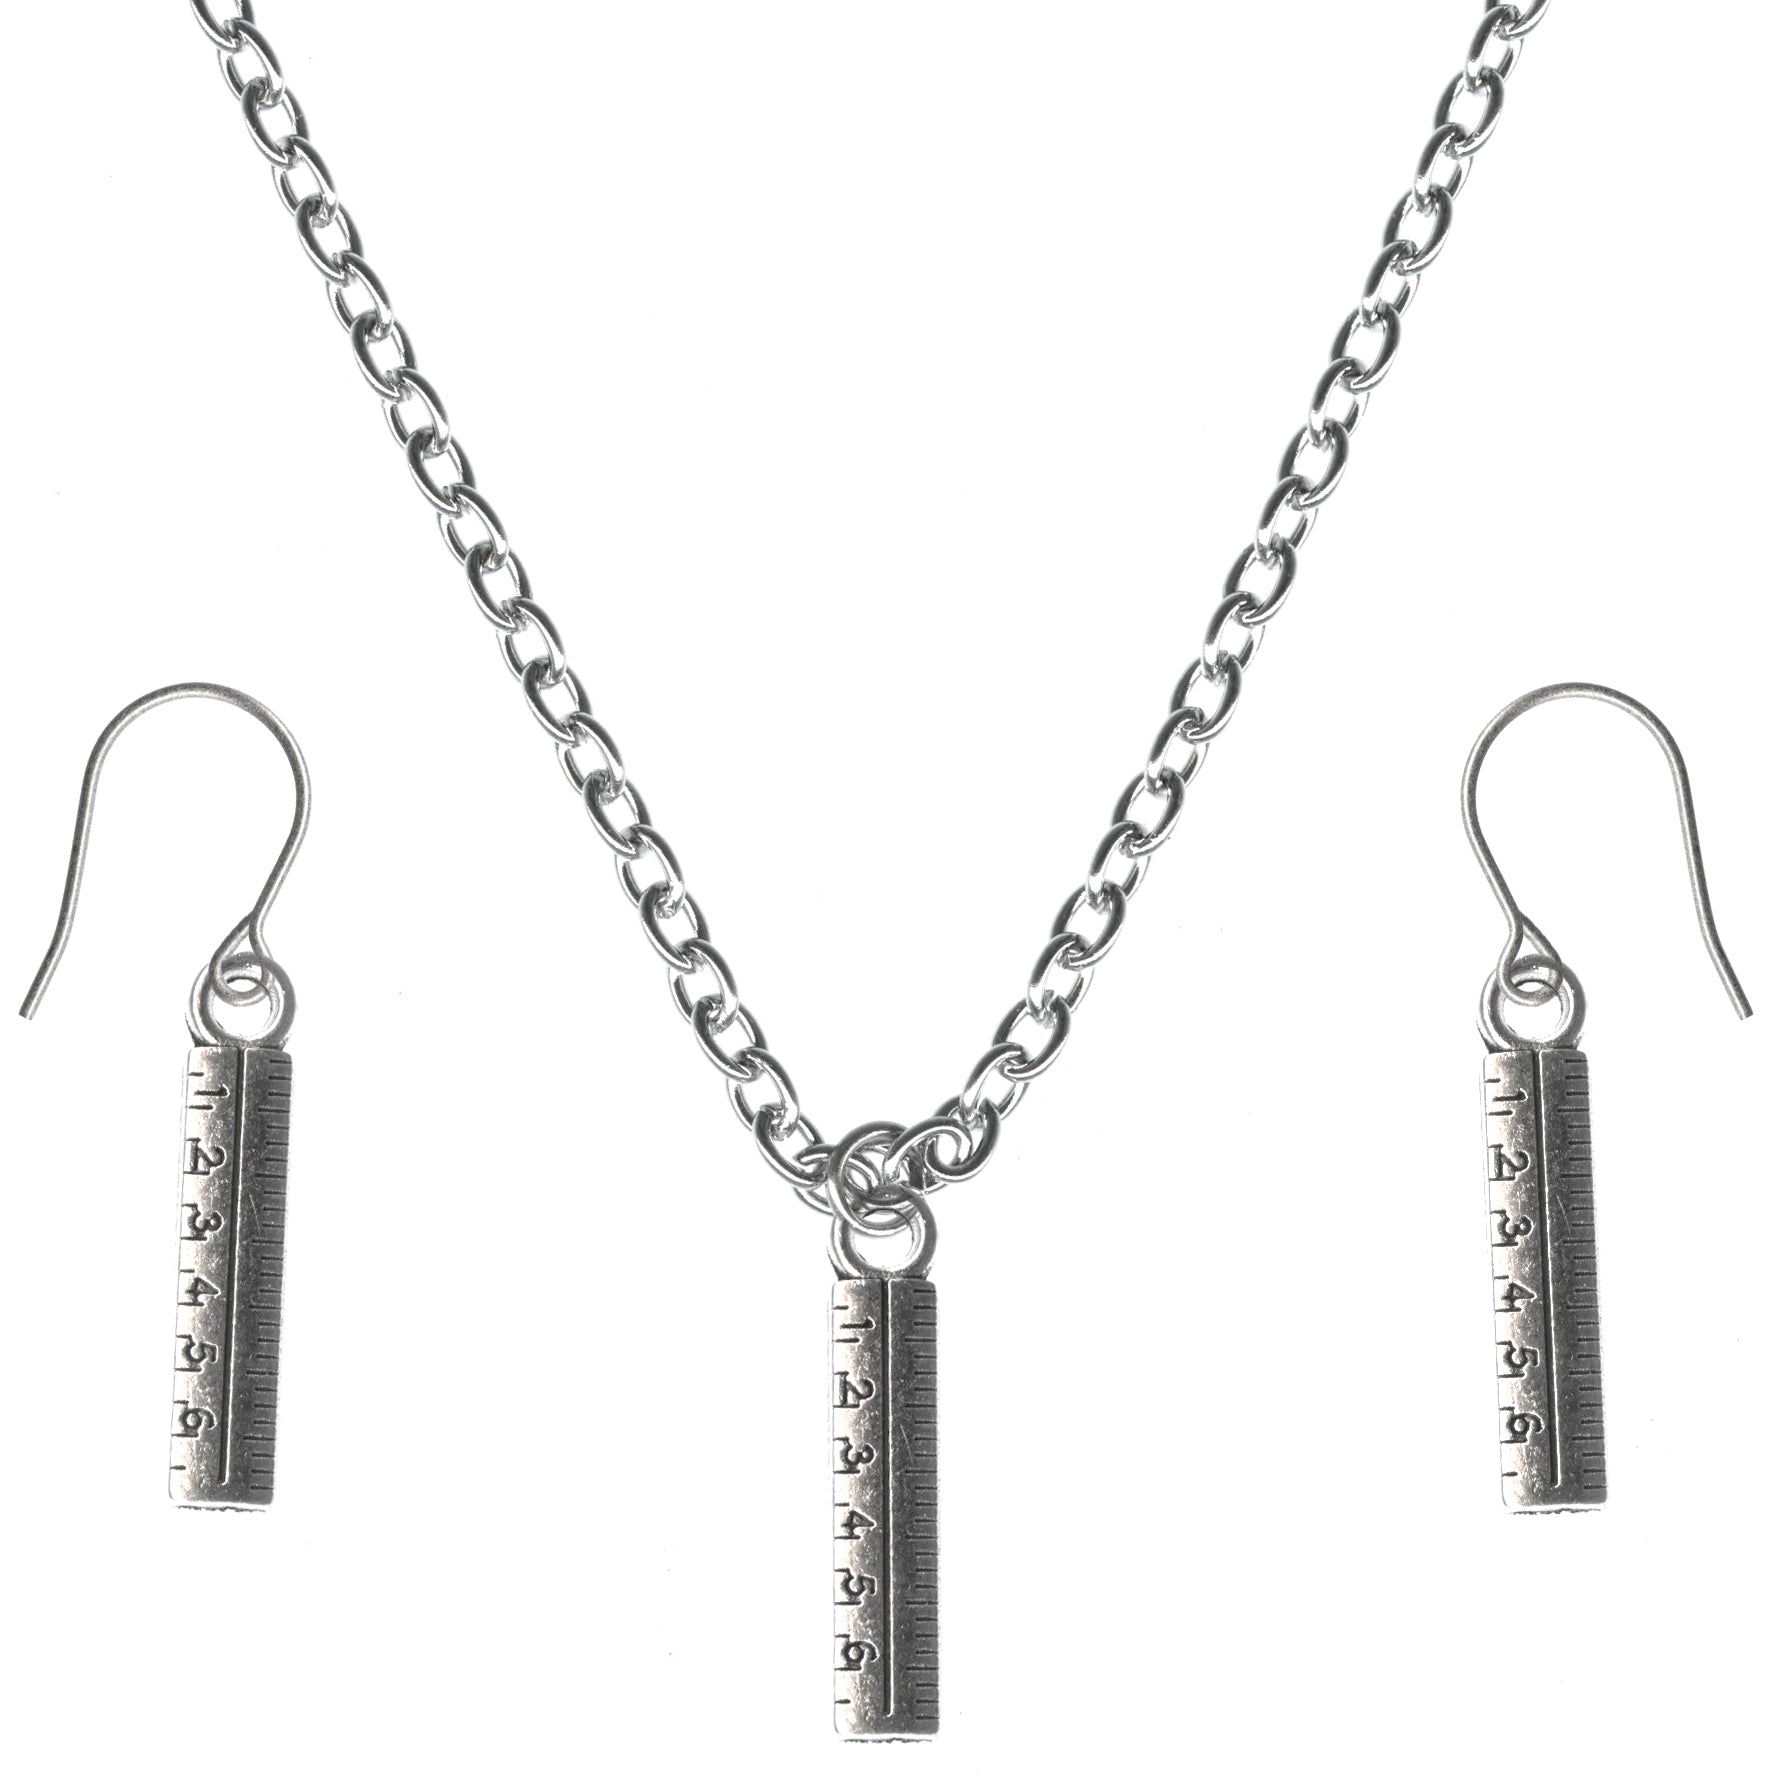 Ruler Charms Steel Chain Necklace and Hypoallergenic Titanium Earrings Set